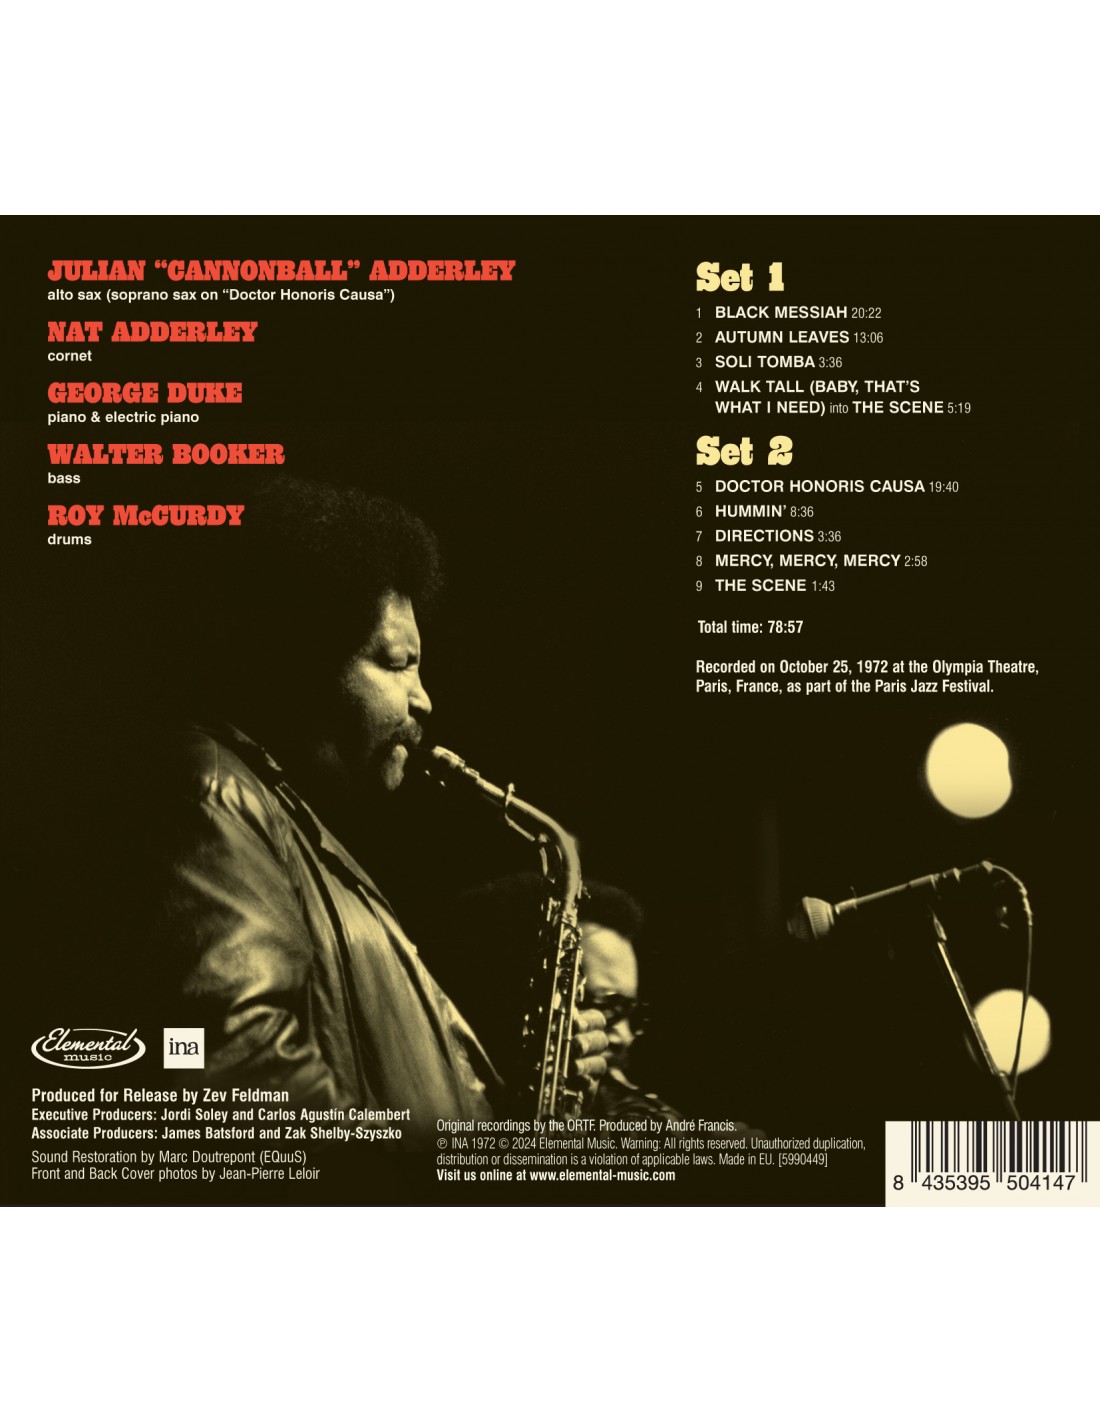 Cannonball Adderley - Poppin in Paris: Live at L'Olympia 1972